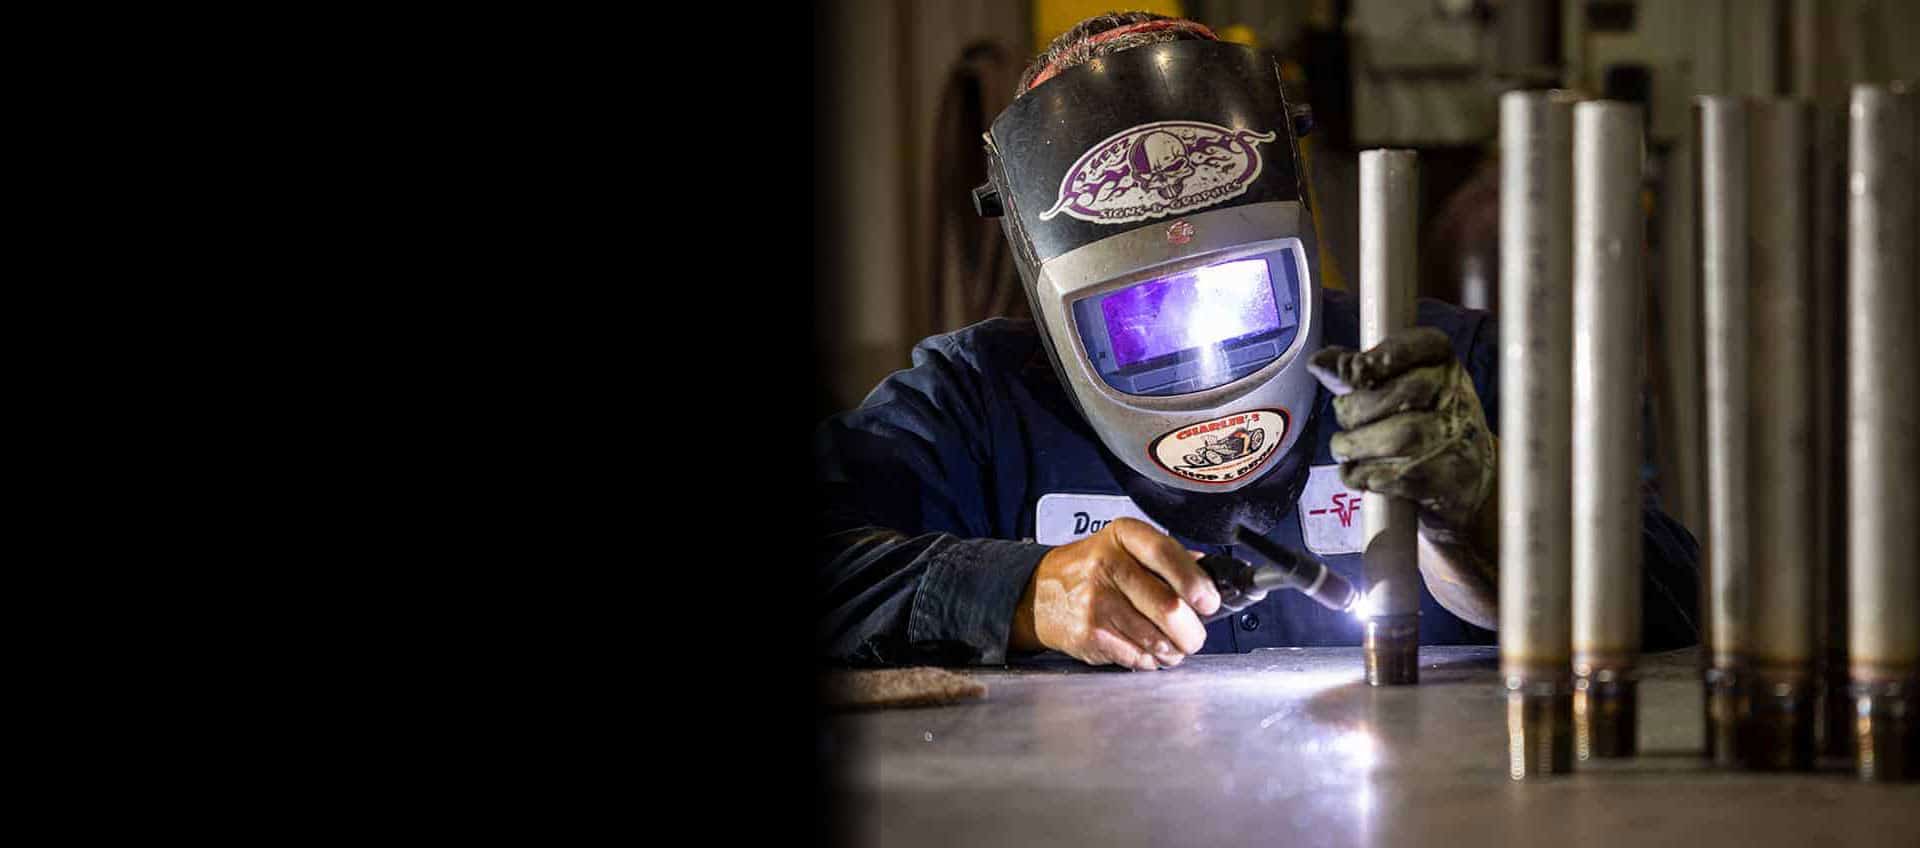 SWF employee in welding helmet welds piping with precision and safety